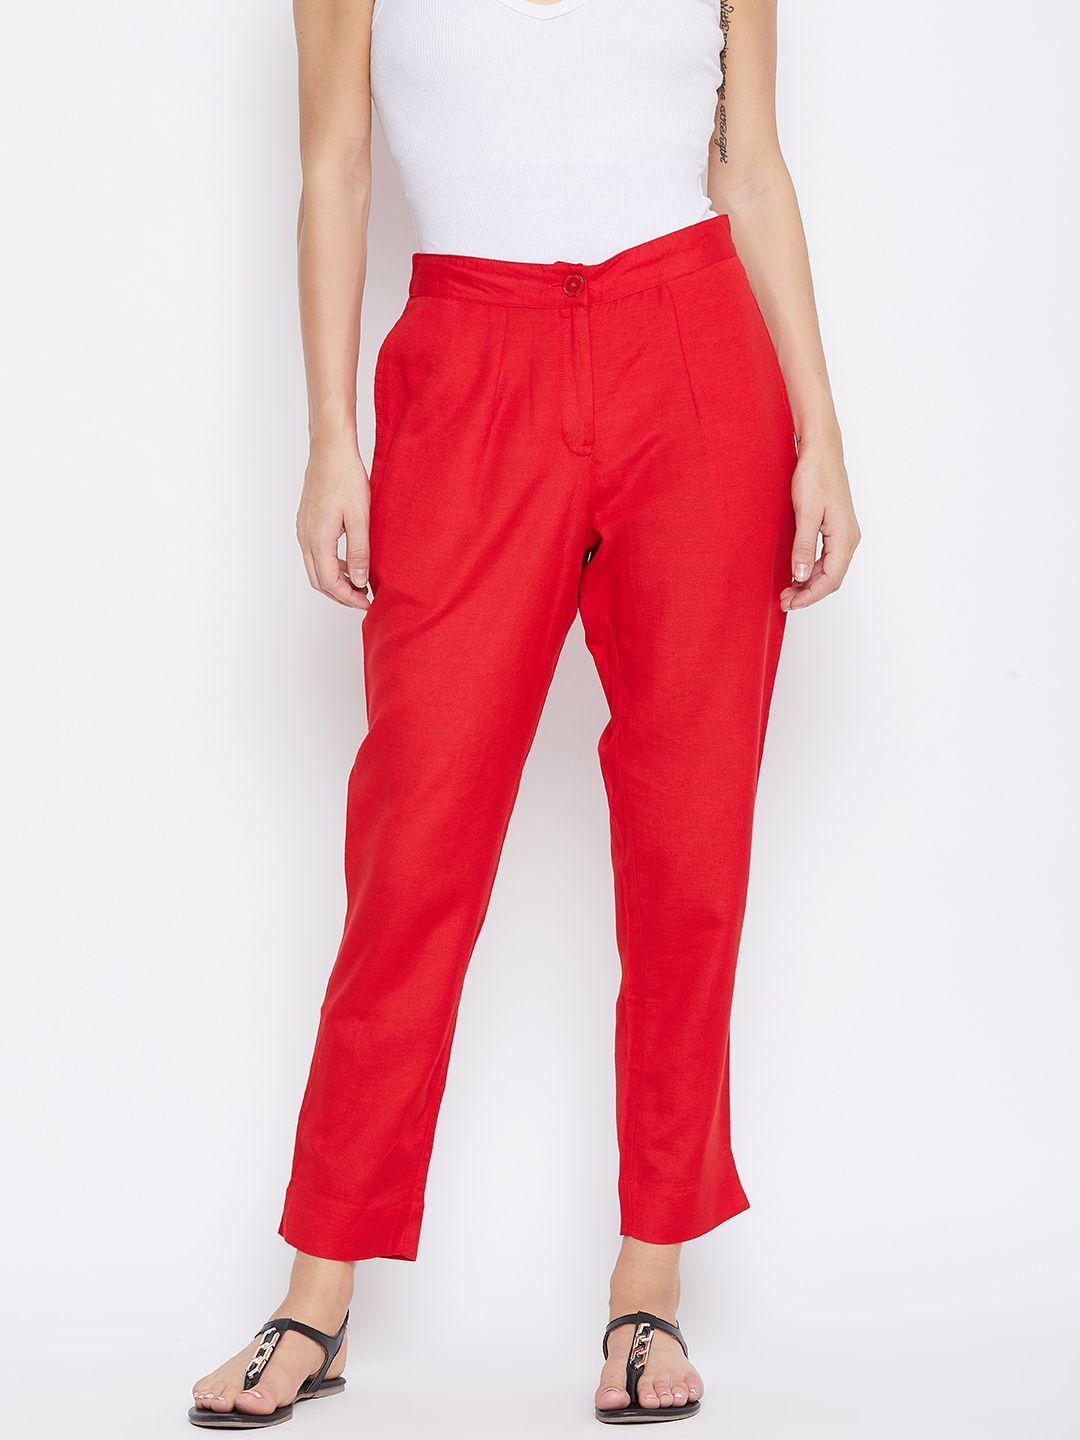 fabglobal women red relaxed slim fit solid regular trousers